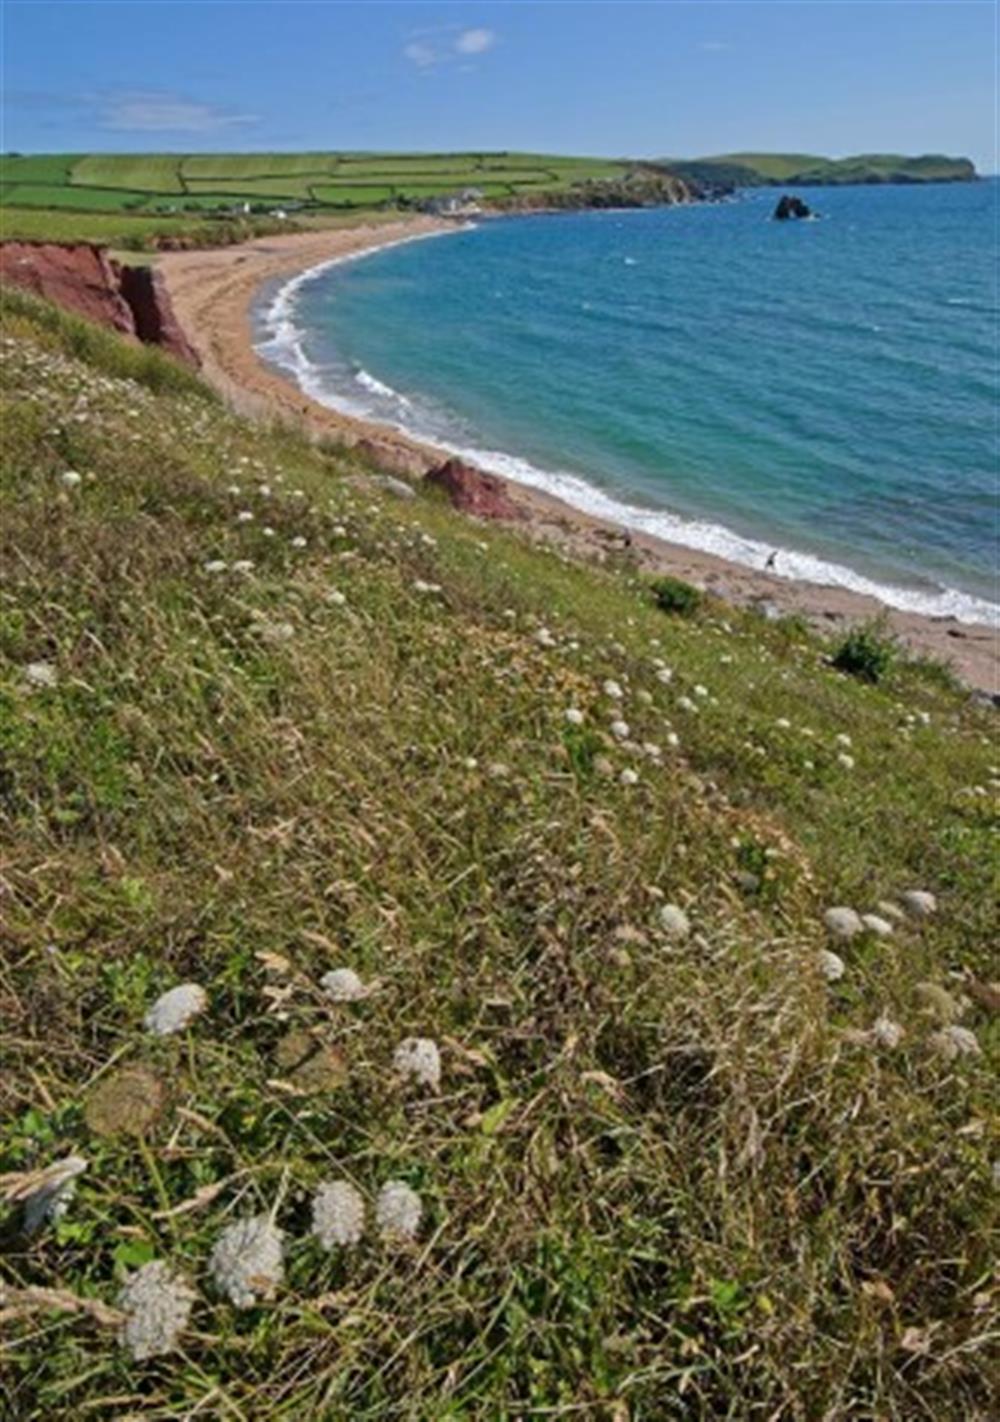 The South West Coastal Path near the apartment. at 3 Oceans Edge in Thurlestone